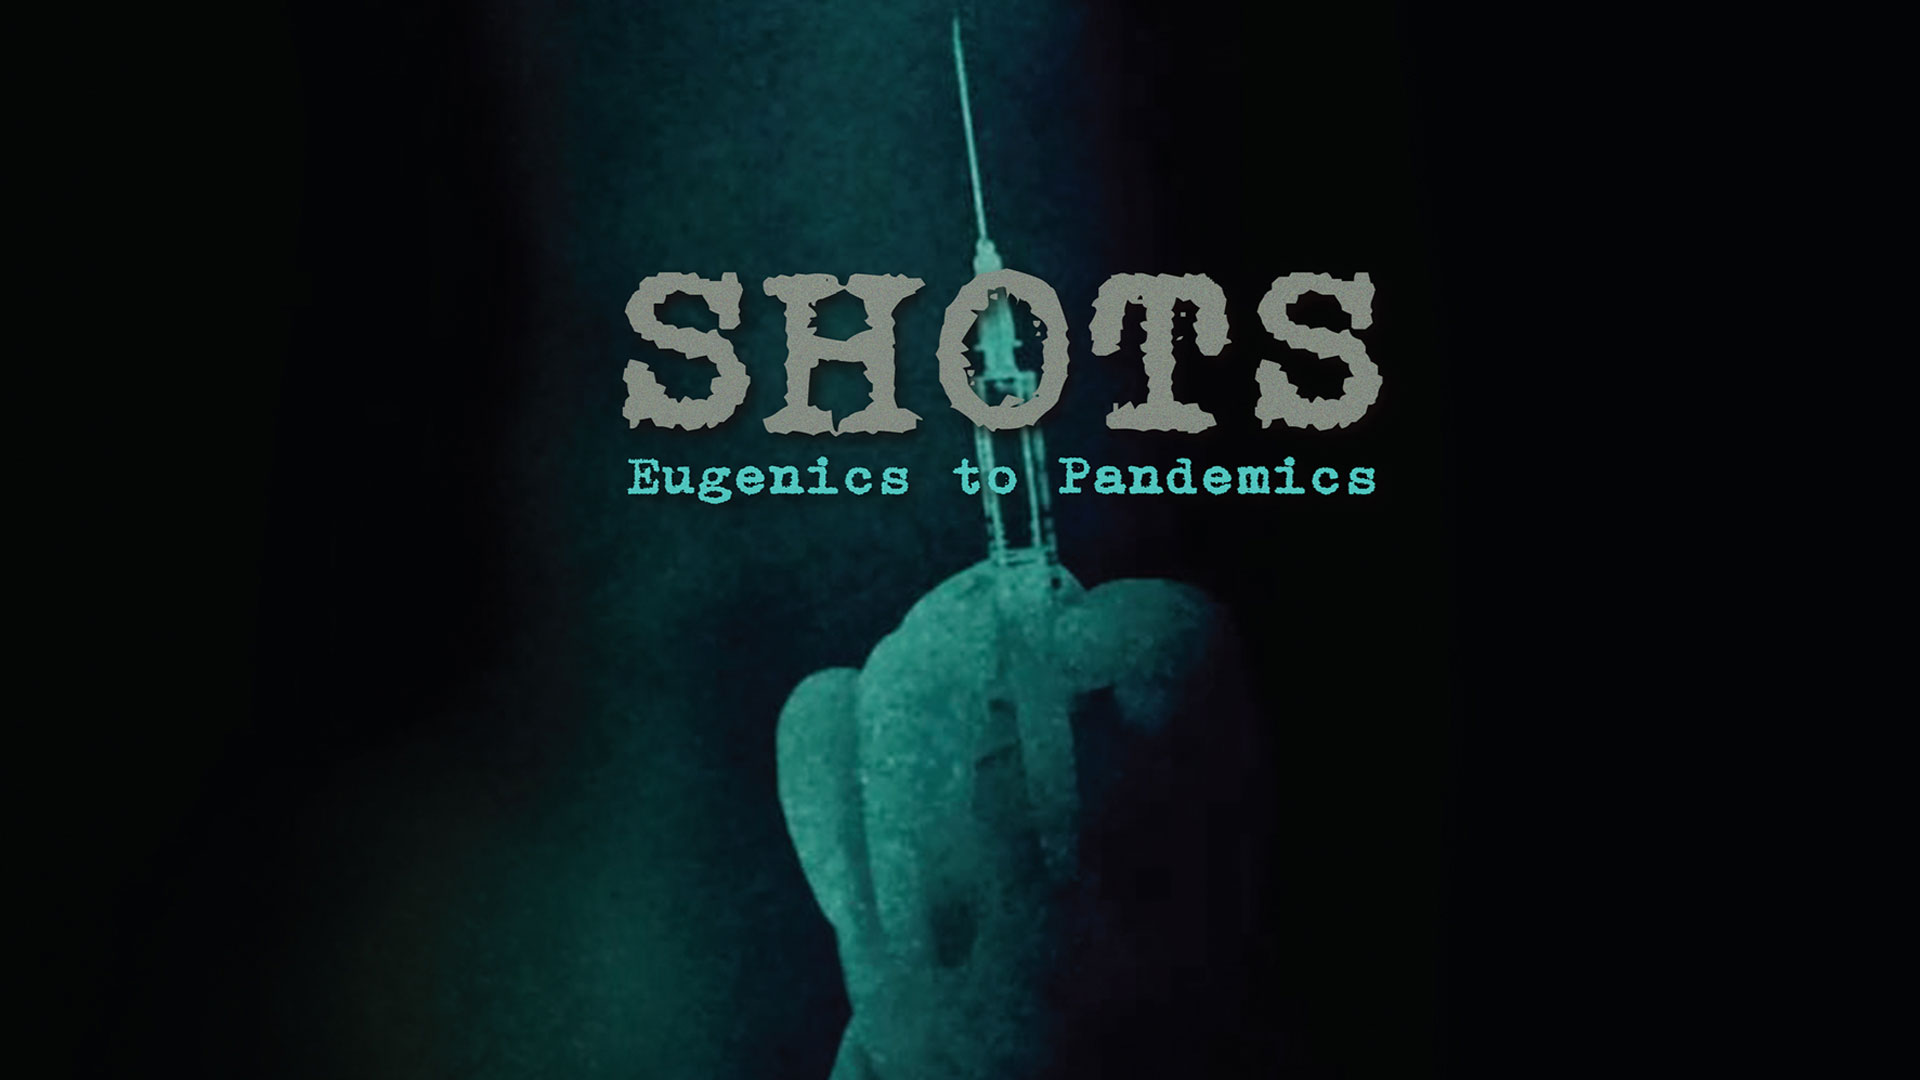 Shots eugenics to pandemics feature